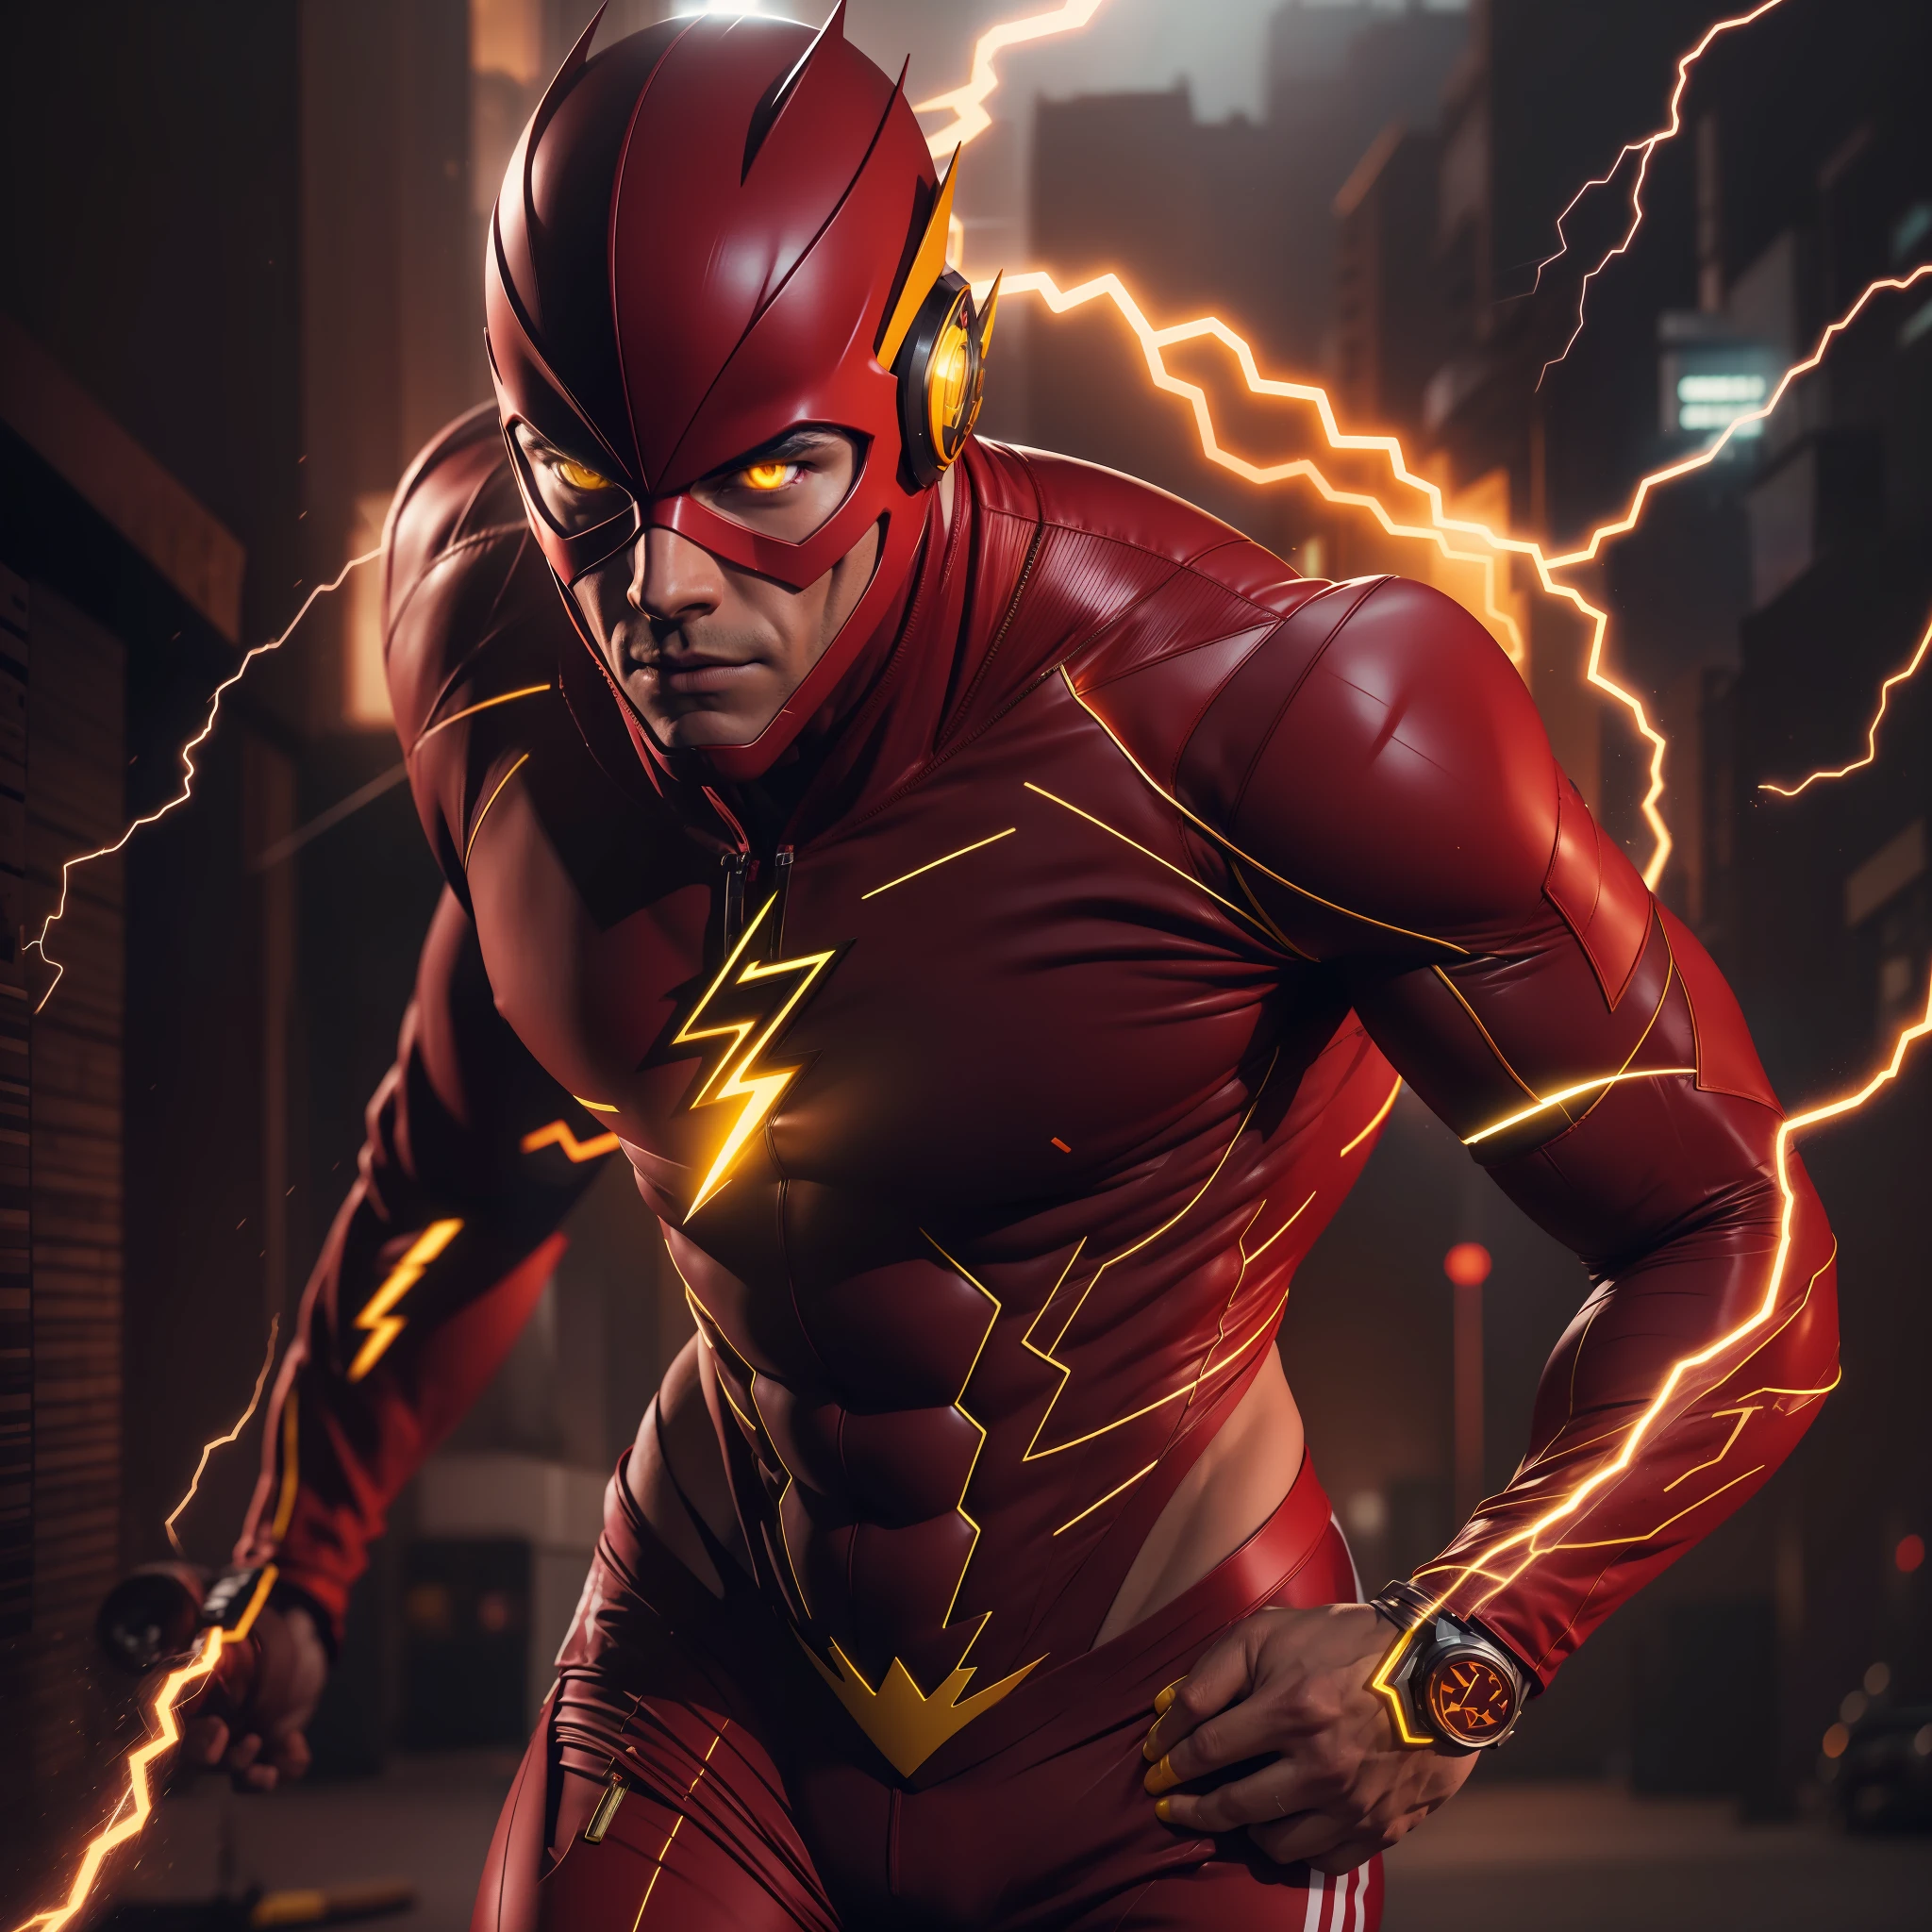 The Flash，Best Premium Grade，A high resolution, Tall, Muscular, hunk, White plate and scarlet neon set, Large glowing yellow eyes, Stand in a strong position, Yellow lightning track, Detailed face, Detailed suit, Ultra detailed, Masterpiece, Light tuning in the background, 4K, RAW photo, Low camera angle，Virtual engine rendering，Sprint cyberpunk flash ， Summon masks， glowing bright yellow eyes， body builder， jogging， urban in the background， lightning in sky， Hyper-detailing， hyper realisitc， cinematic ligh ，rendering by octane， 16k，salama，The body is surrounded by lightning，Zack Schneider film style